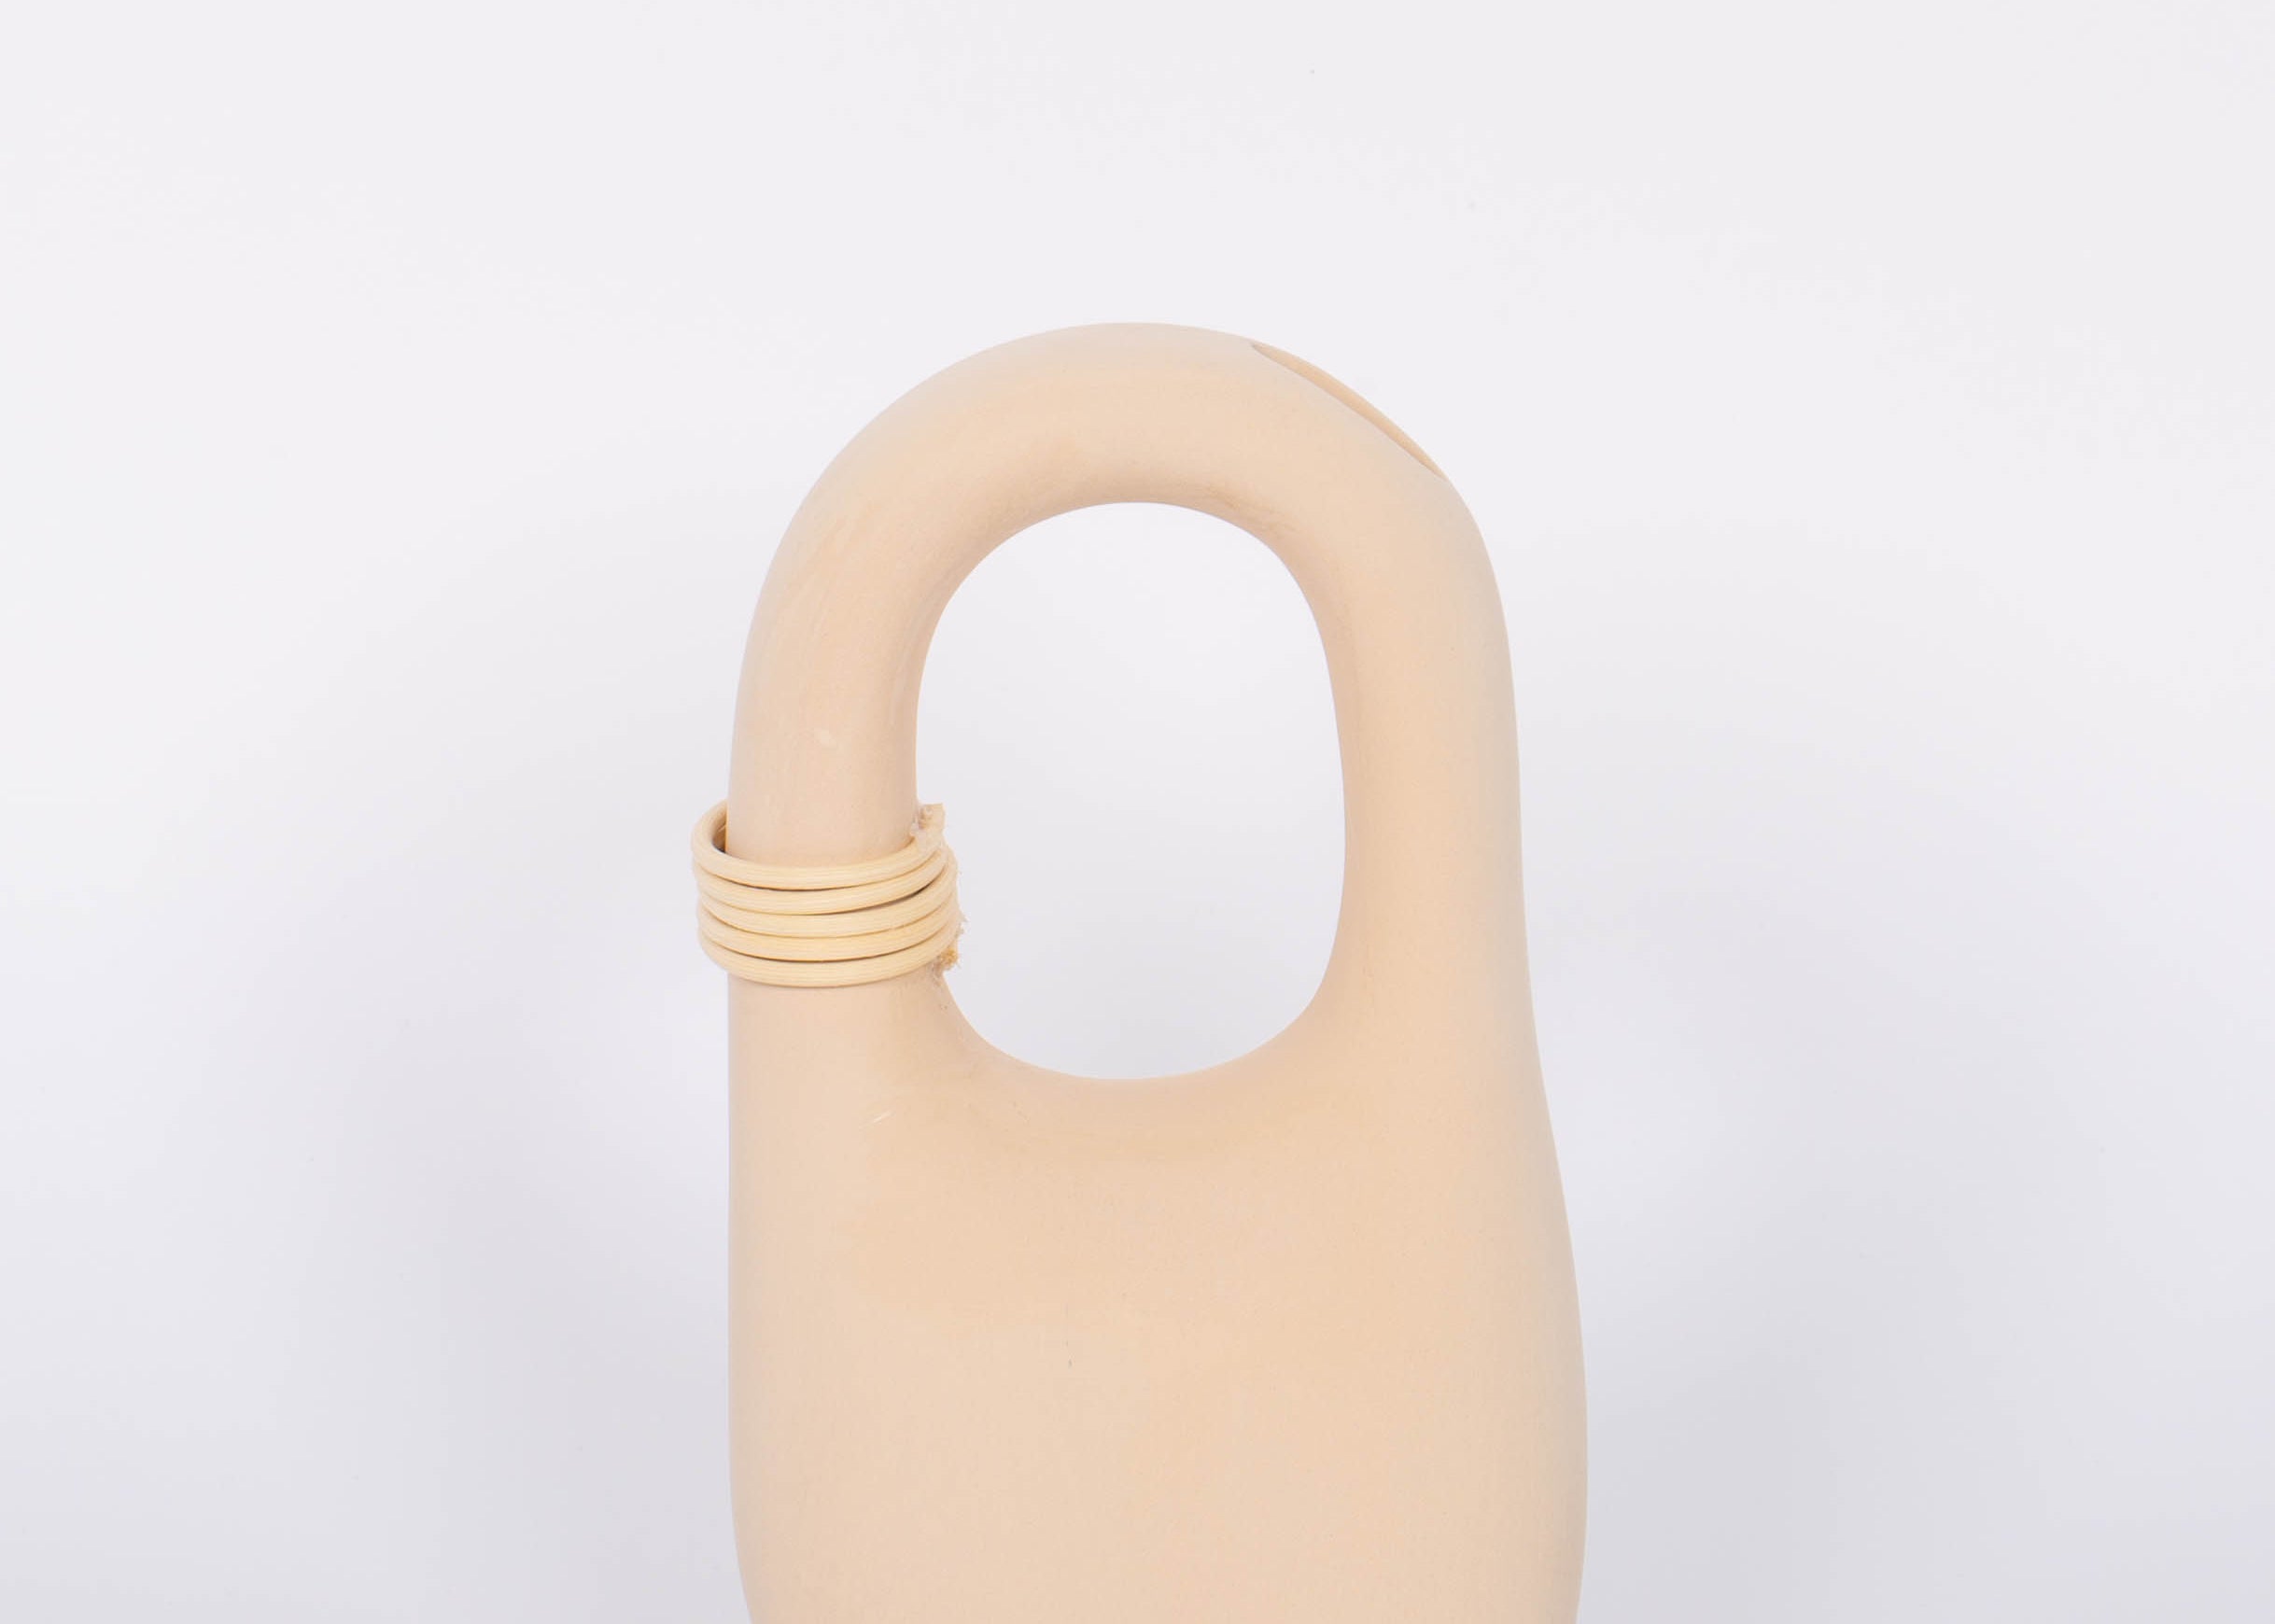 Palau Tan Vase matte finish with natural bisque cermaic, unique handle feature and wrapped rattan coil. White background.